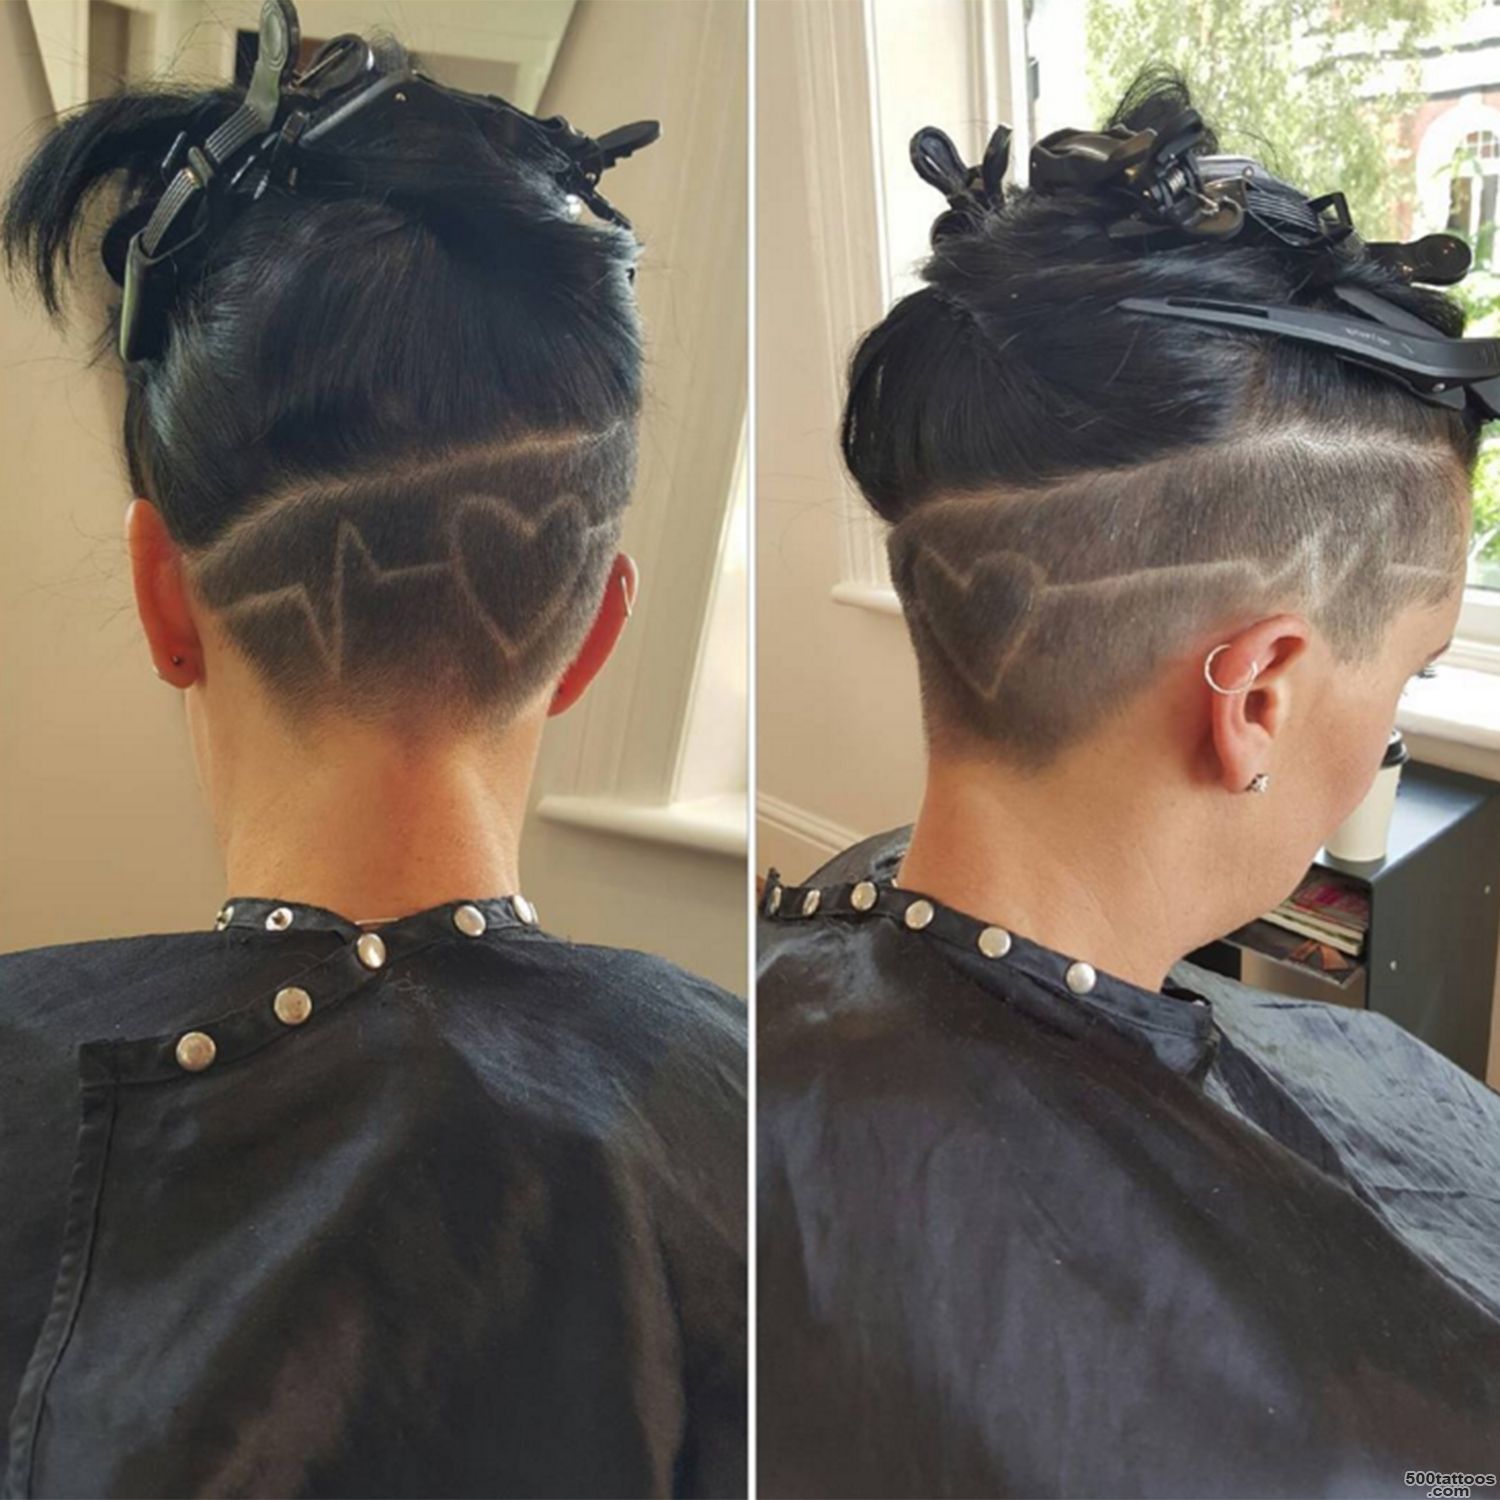 Now you see it How hidden hair #39tattoos#39 are the latest craze to ..._44